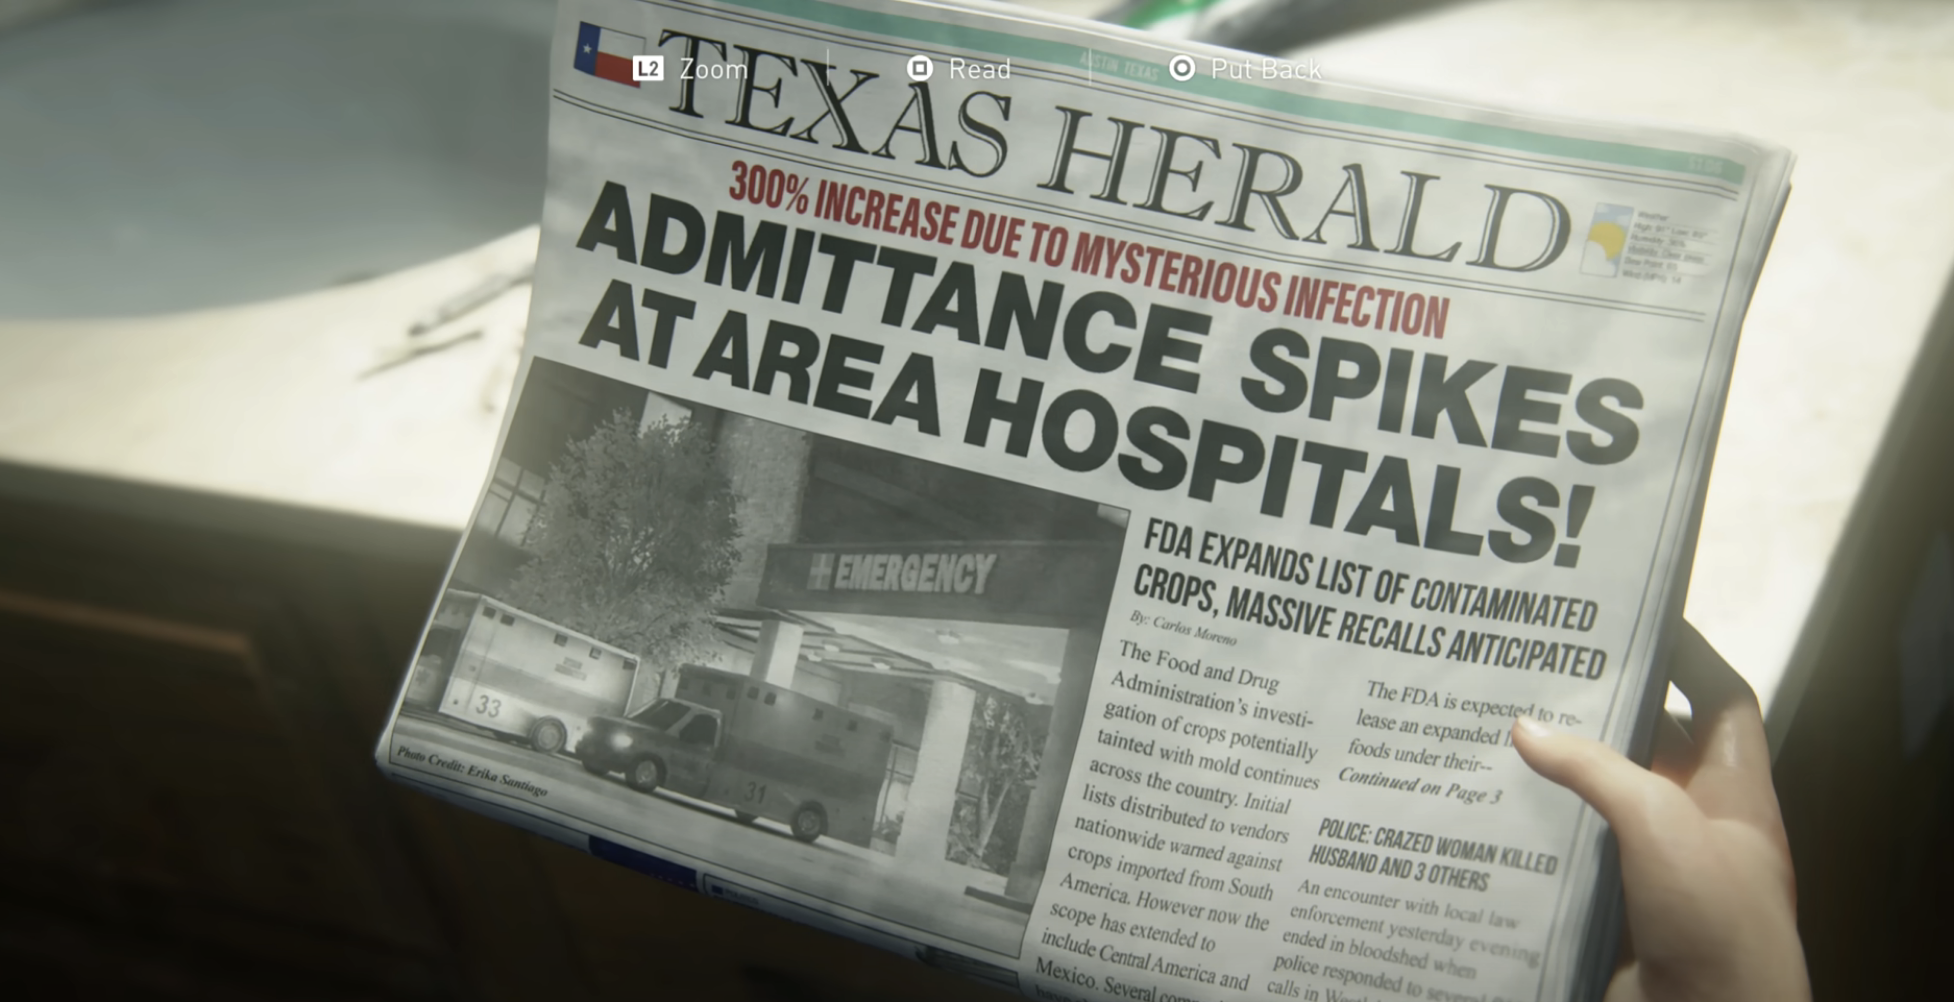 A person holding a copy of the Texas Herald with the headline: Admittance Spikes at Area Hospitals!